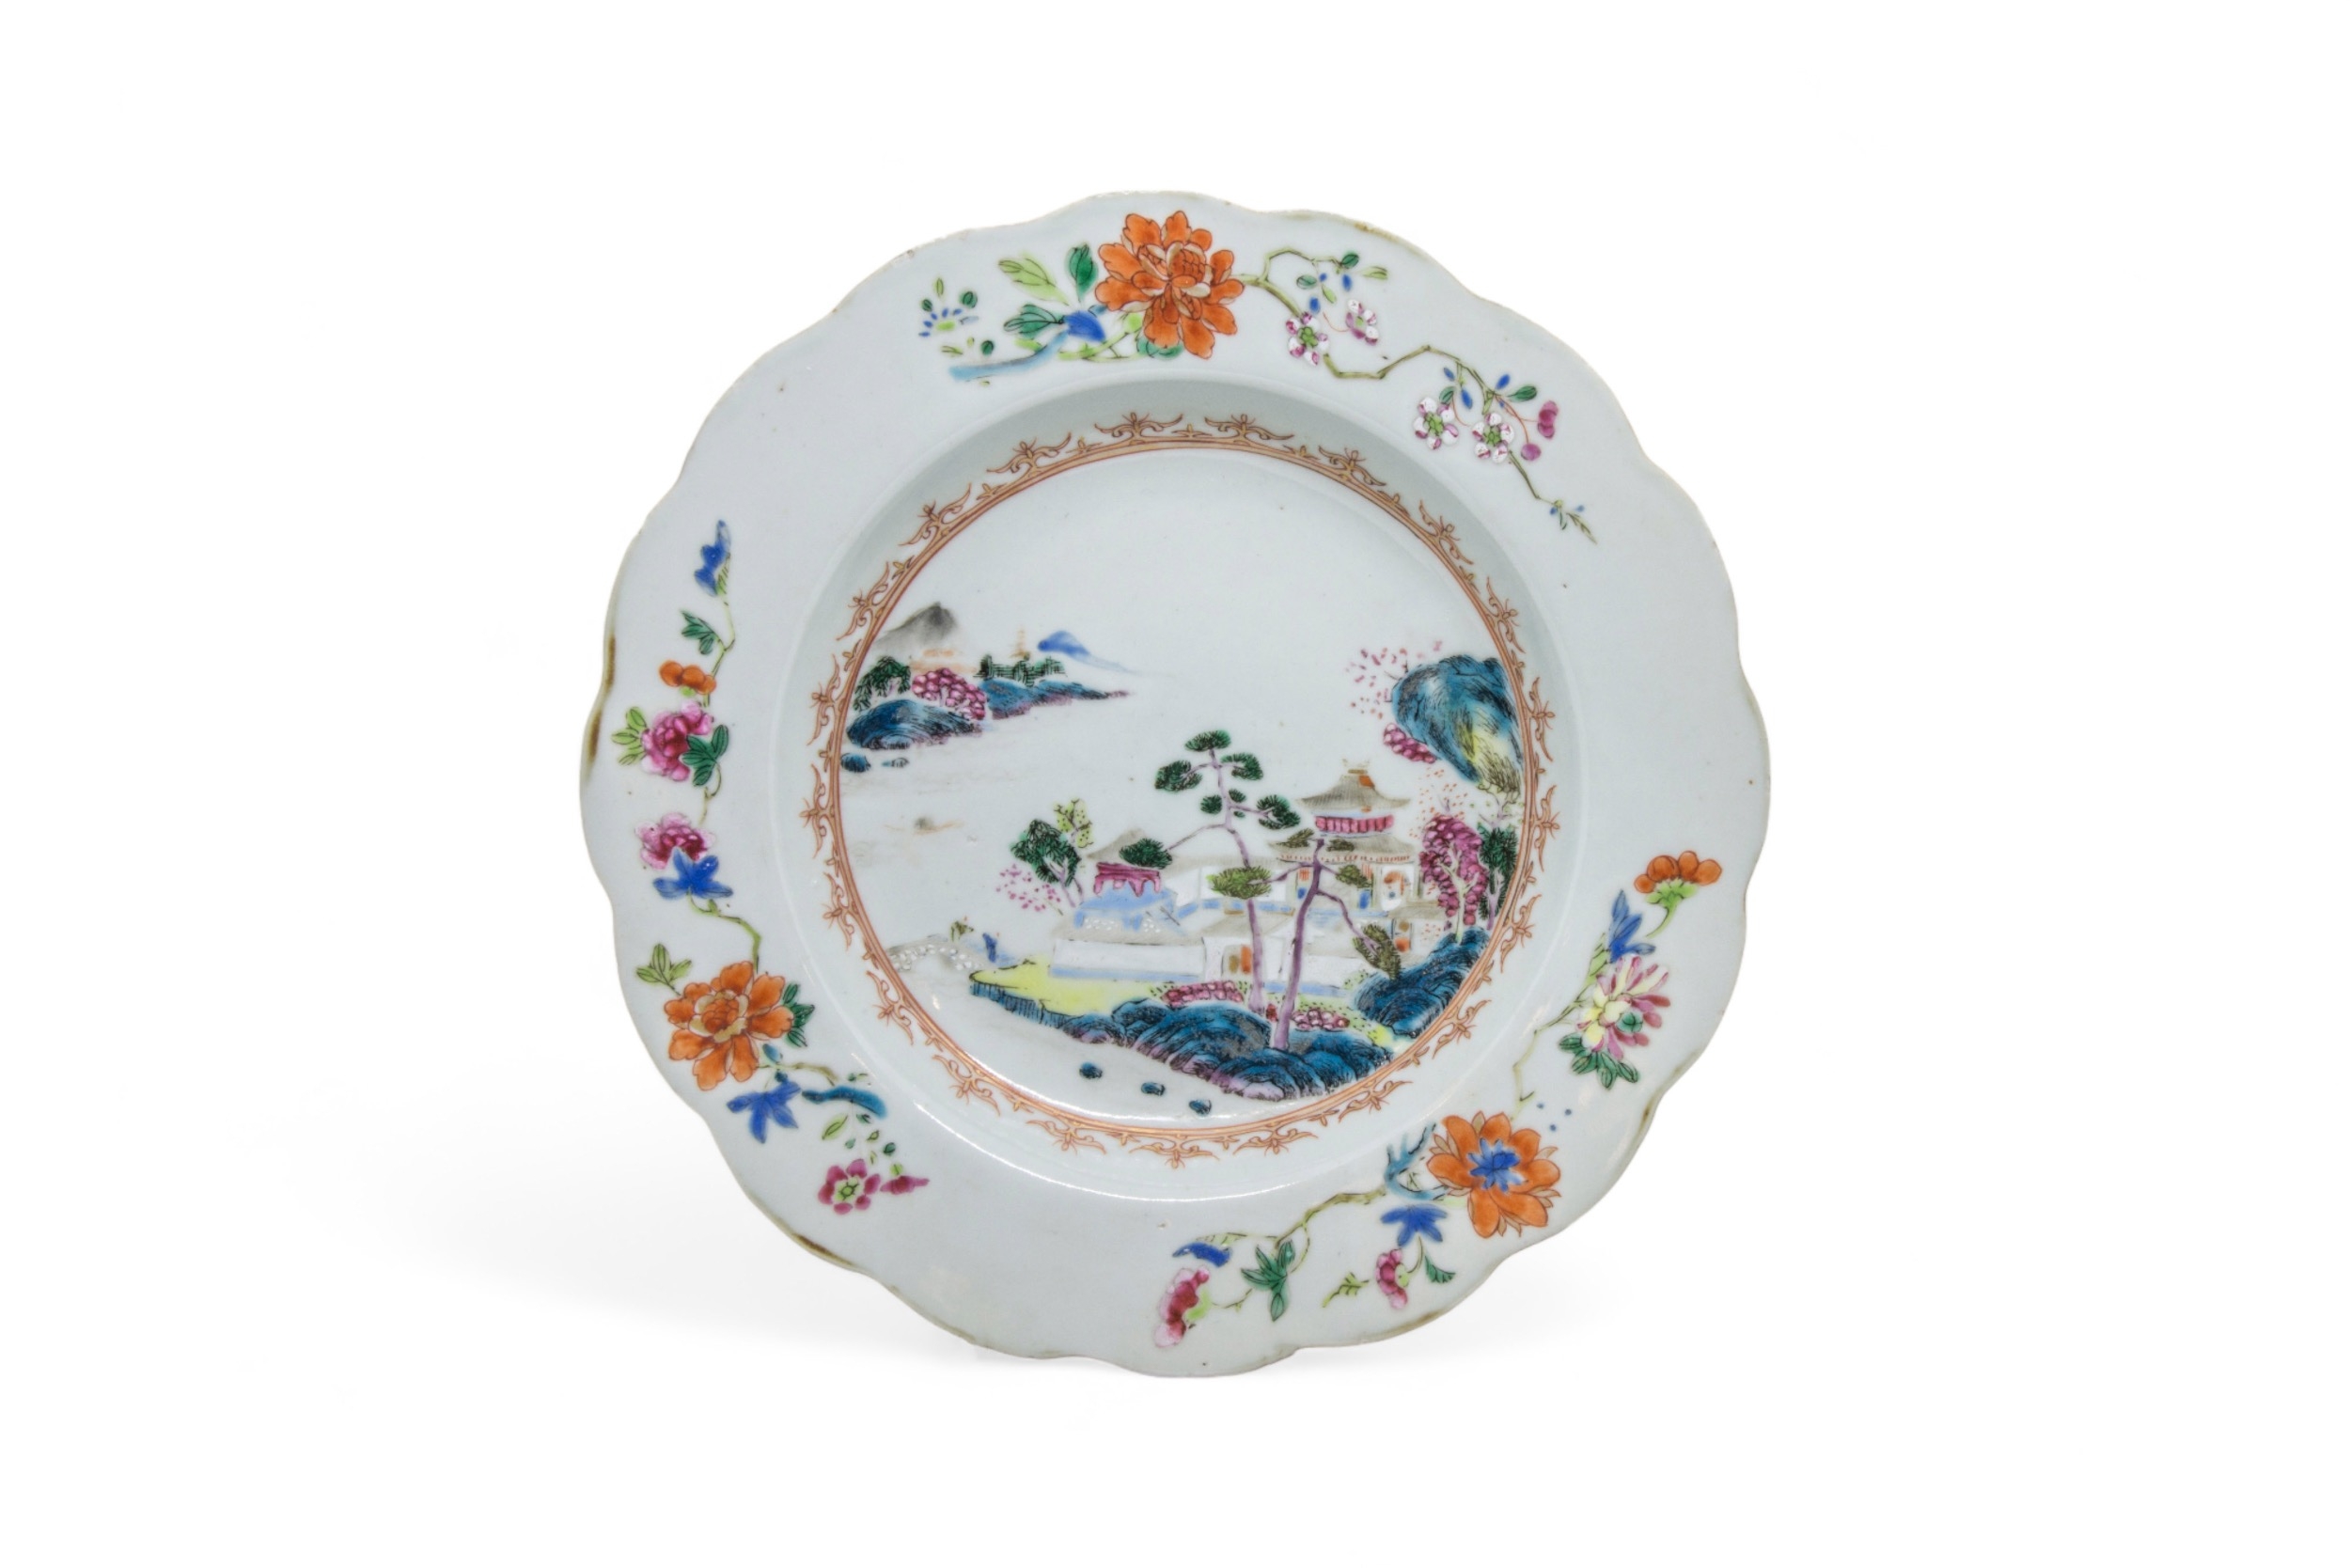 A GROUP OF TEN CHINESE EXPORT DISHES QING DYNASTY, 18TH CENTURY 23cm diam approx. - Image 2 of 11